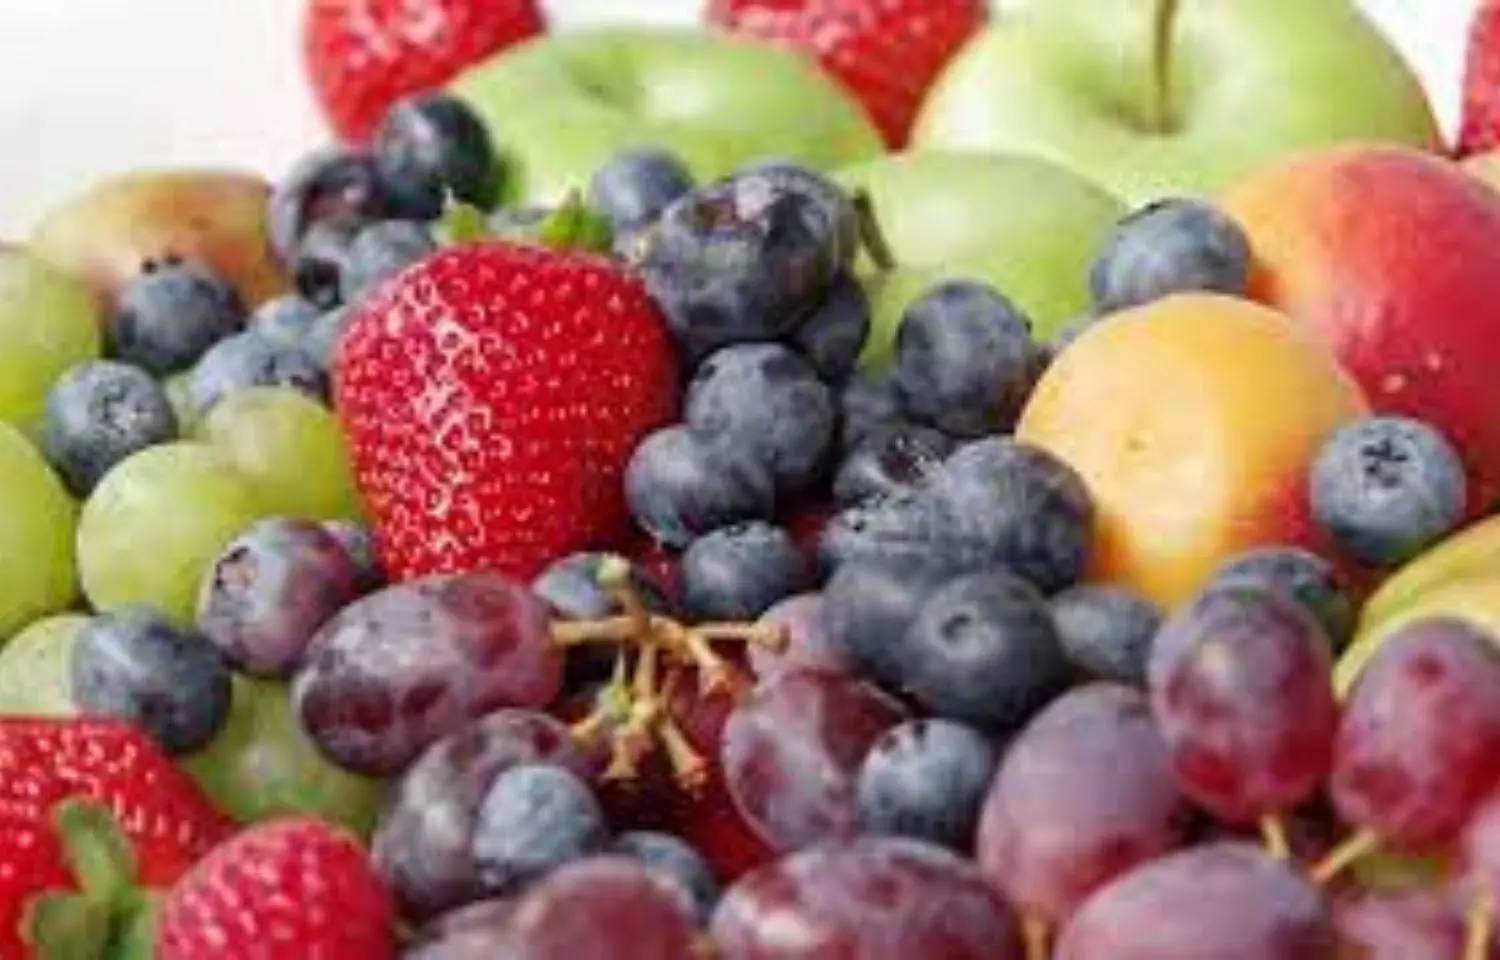 Consumption of flavonoid-rich foods may improve BP control: Study